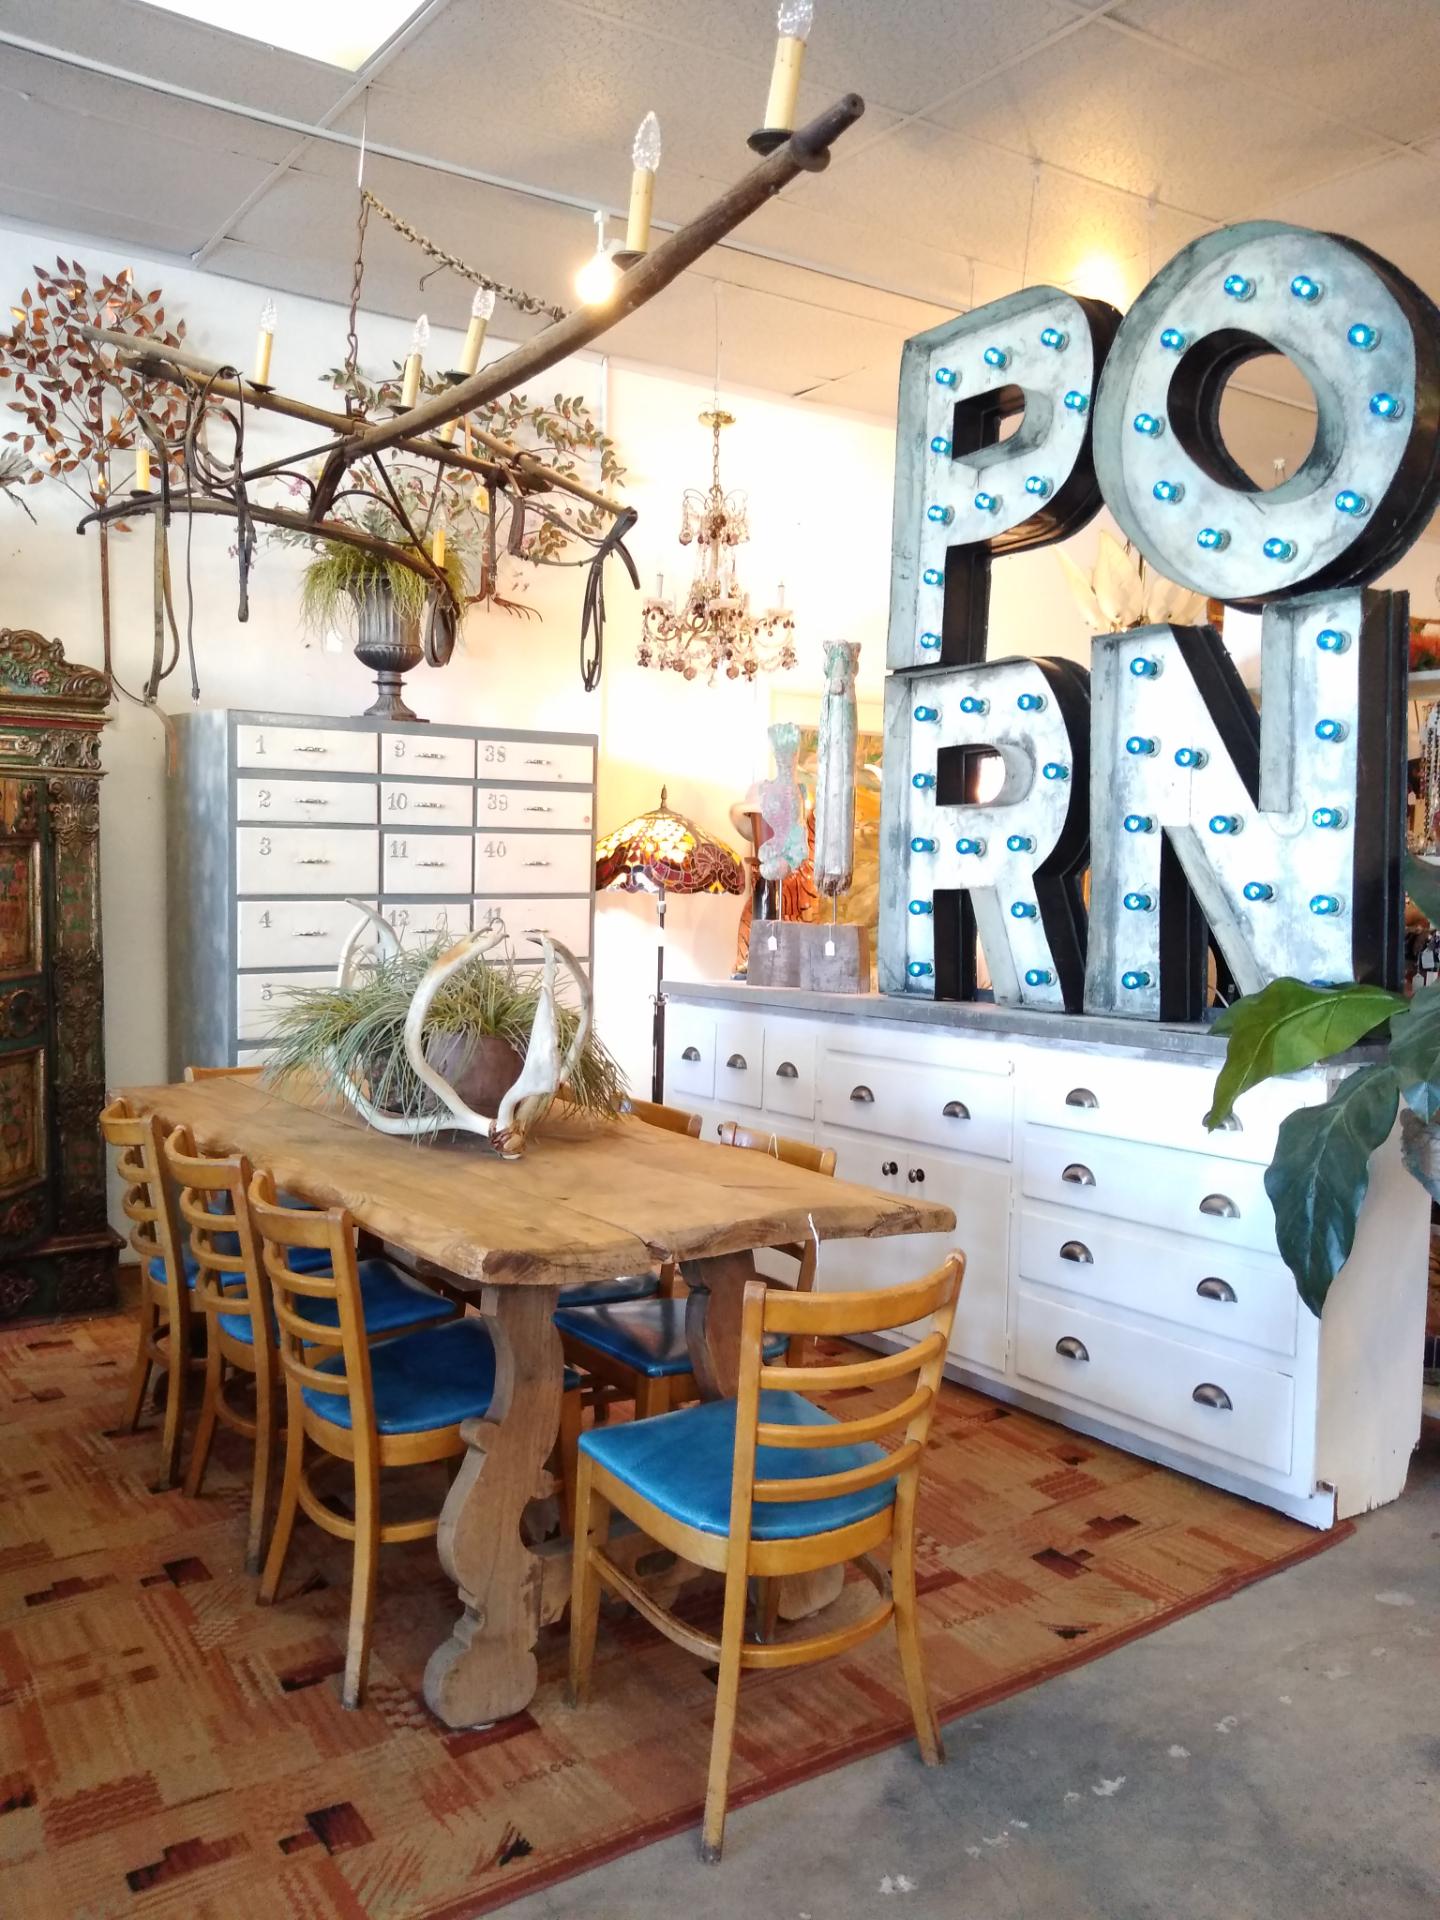 From the artist:
“PORN,” 2018, 6 foot tall x 5 foot wide. Salvaged early 20th-century store sign letters, blue light bulbs, electrical wiring is a satirical homage to Robert Indiana’s “LOVE” sculpture, re-examining the state of human relationships,